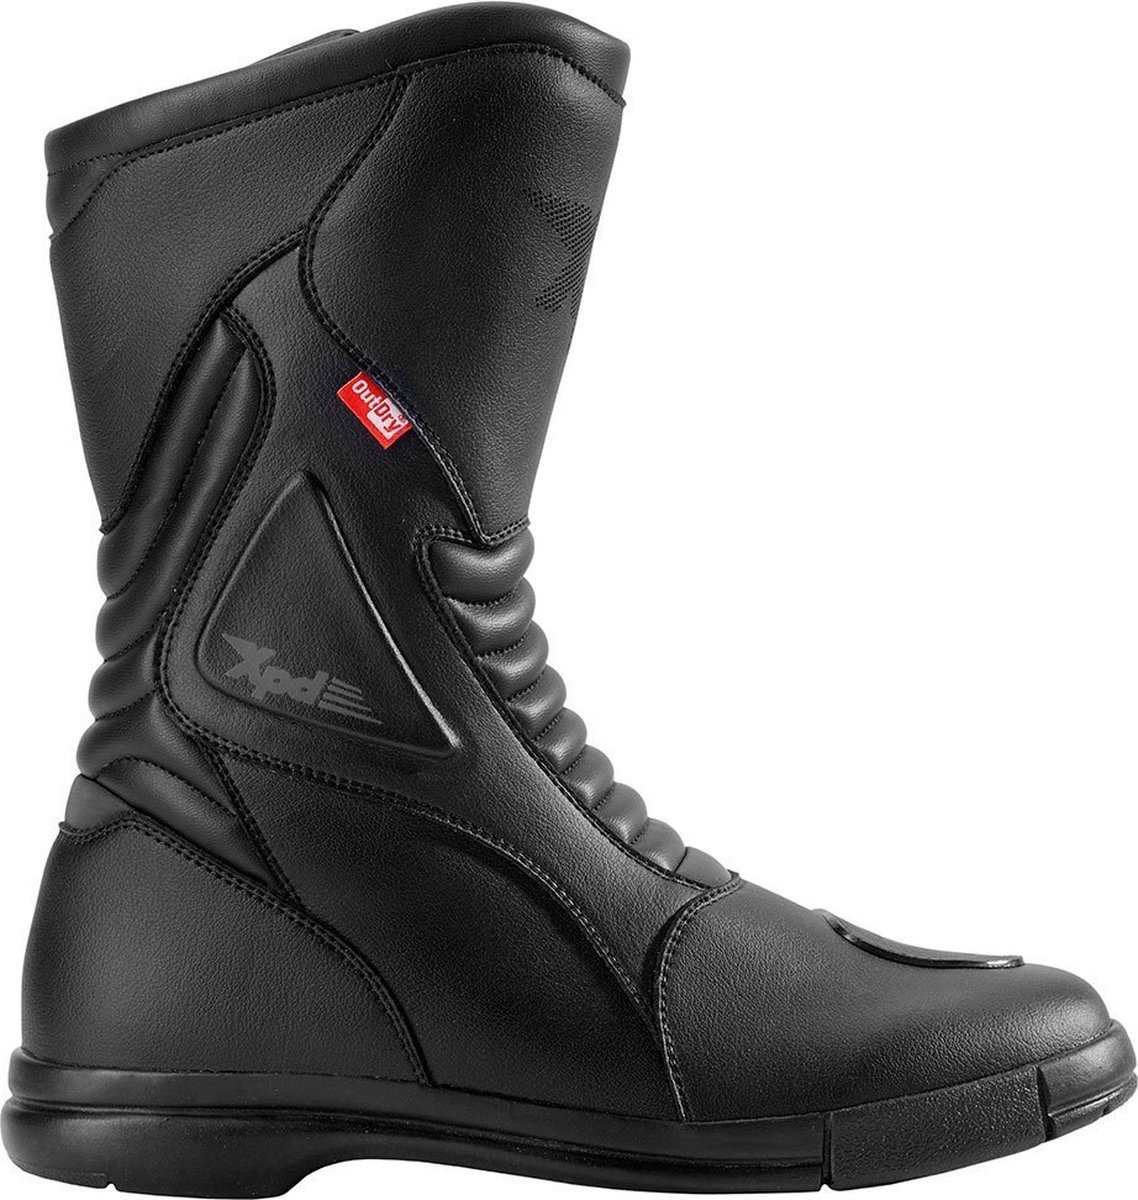 XPD X-TRAIL OUTDRY BLACK BOOTS 45 - Maat - Laars